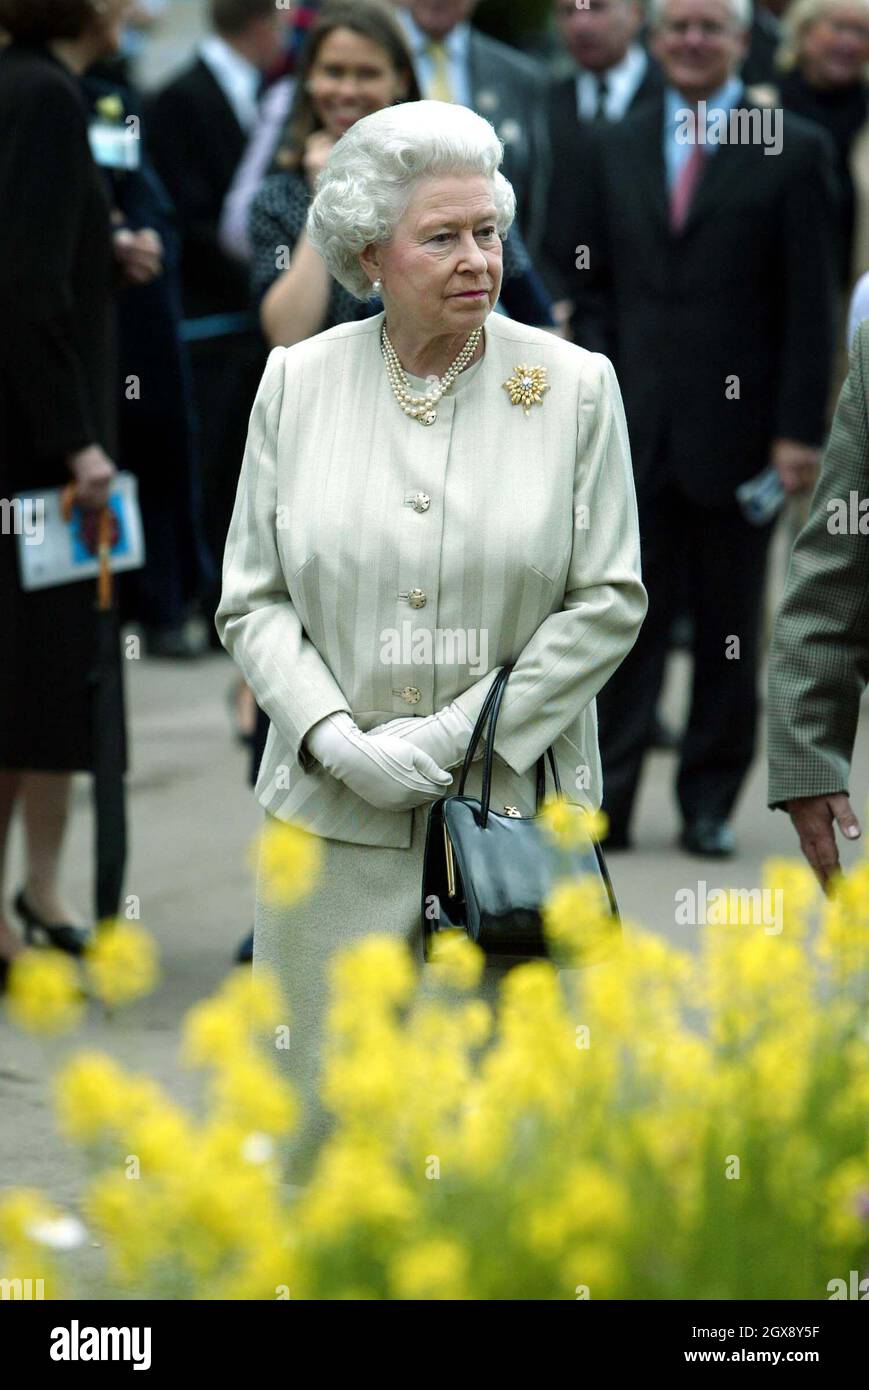 The Queen examines exhibits during her visit to the Royal Horticultural Society's Chelsea Flower Show in London. Half length, Royals  Â©Anwar Hussein/allaction.co.uk  Stock Photo